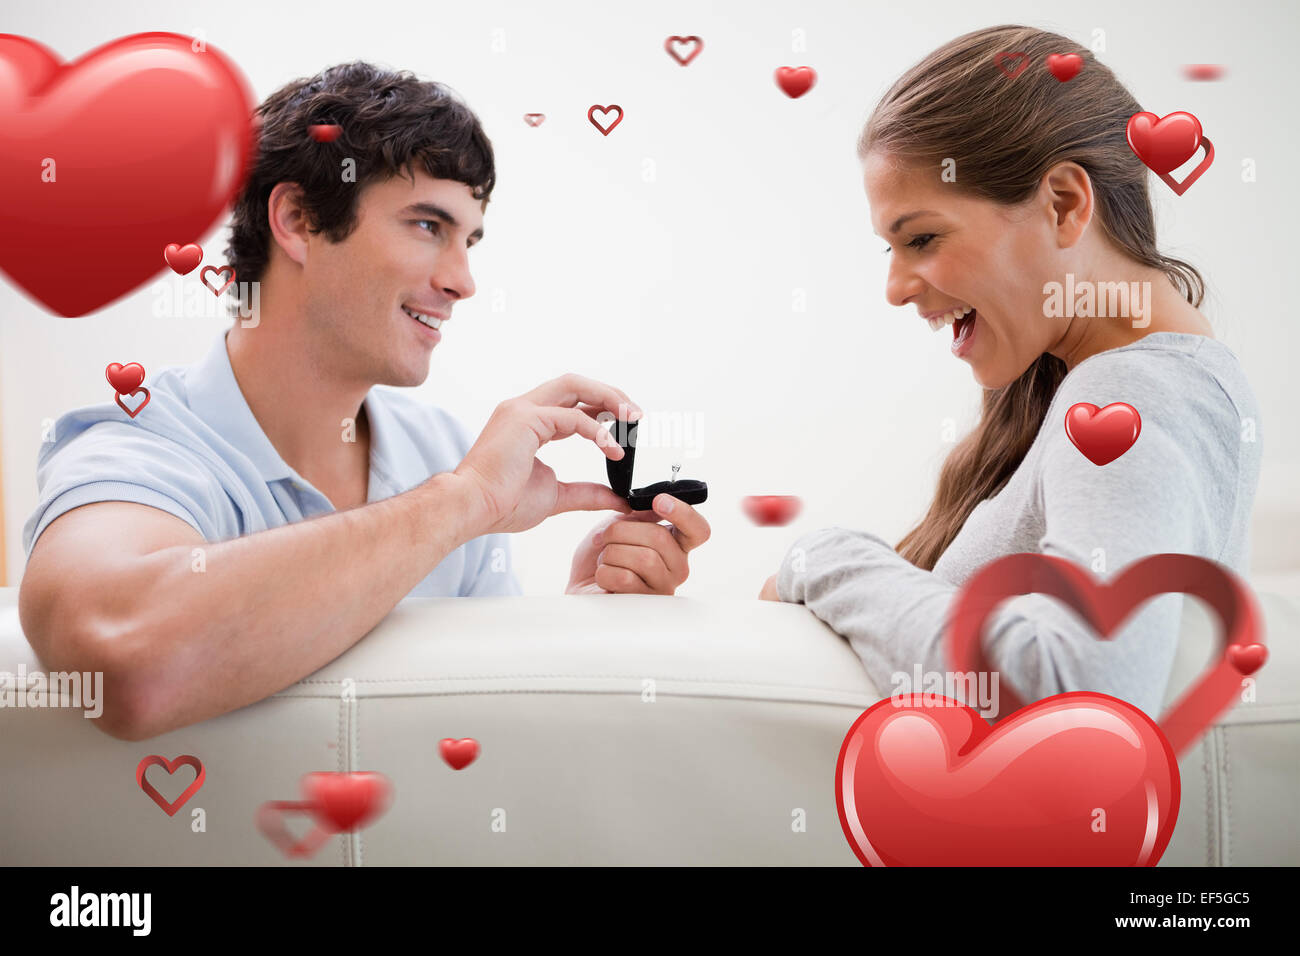 Composite image of man making a proposal to his girlfriend Stock Photo